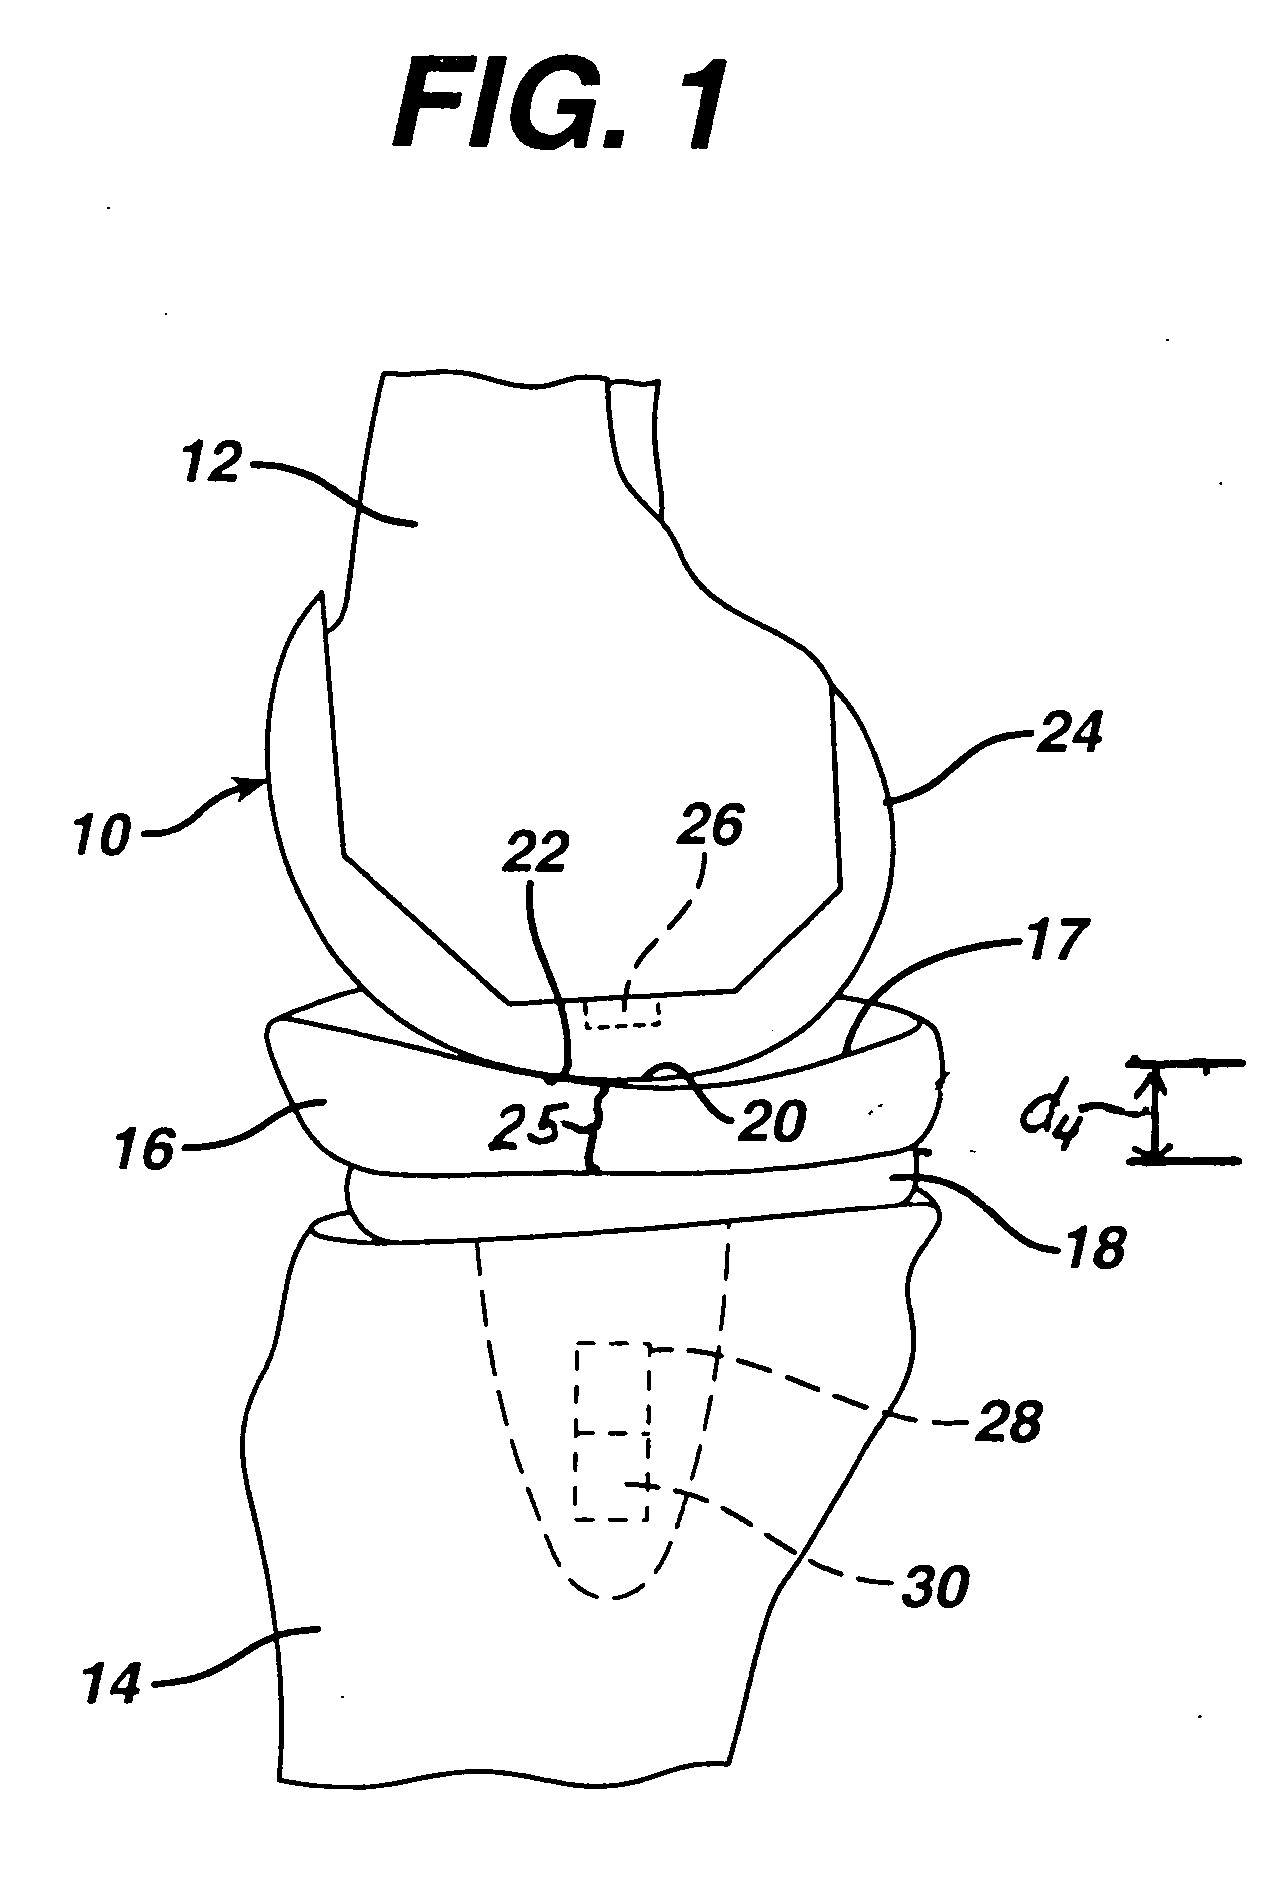 In vivo joint space measurement device and method